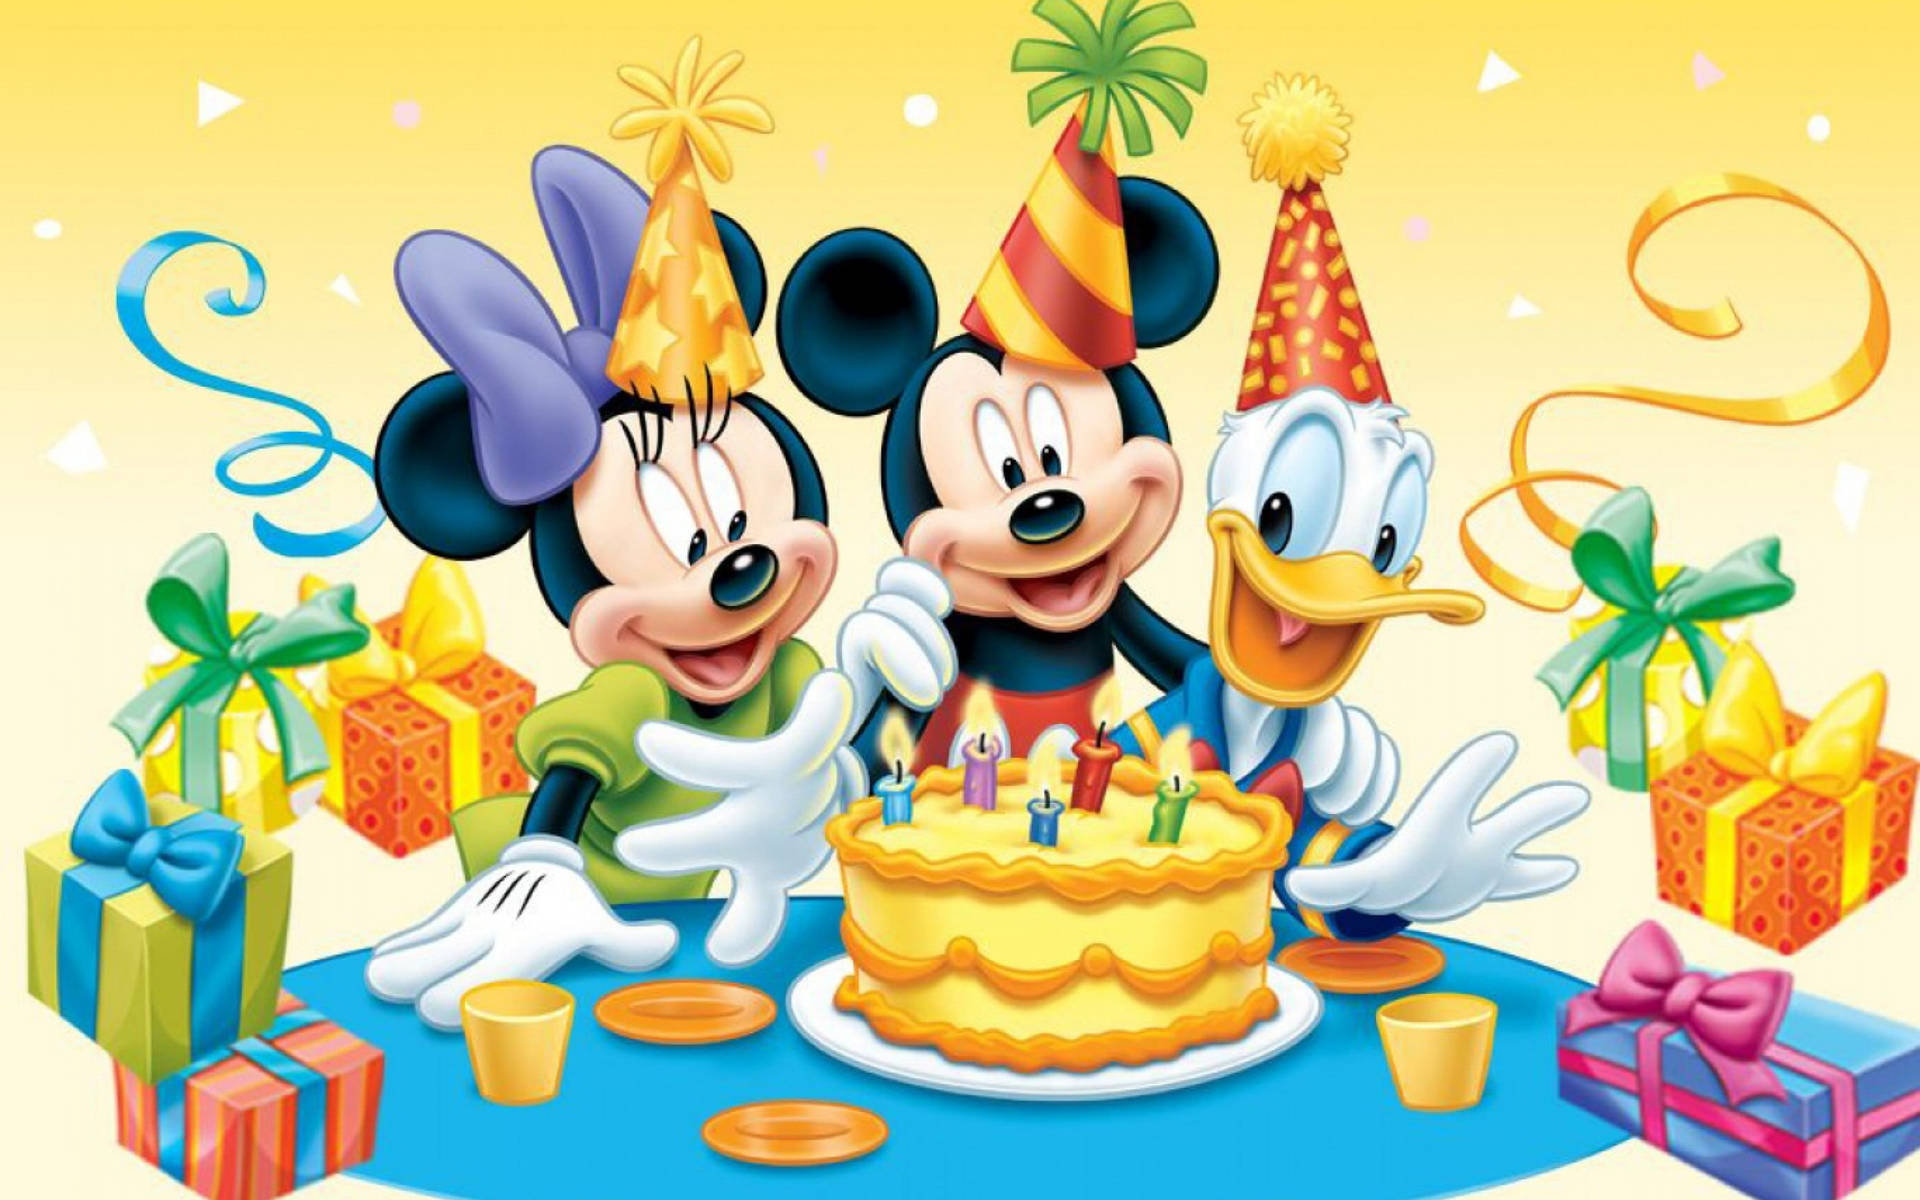 Free Mickey Mouse Birthday Wallpaper Downloads, [100+] Mickey Mouse Birthday  Wallpapers for FREE 